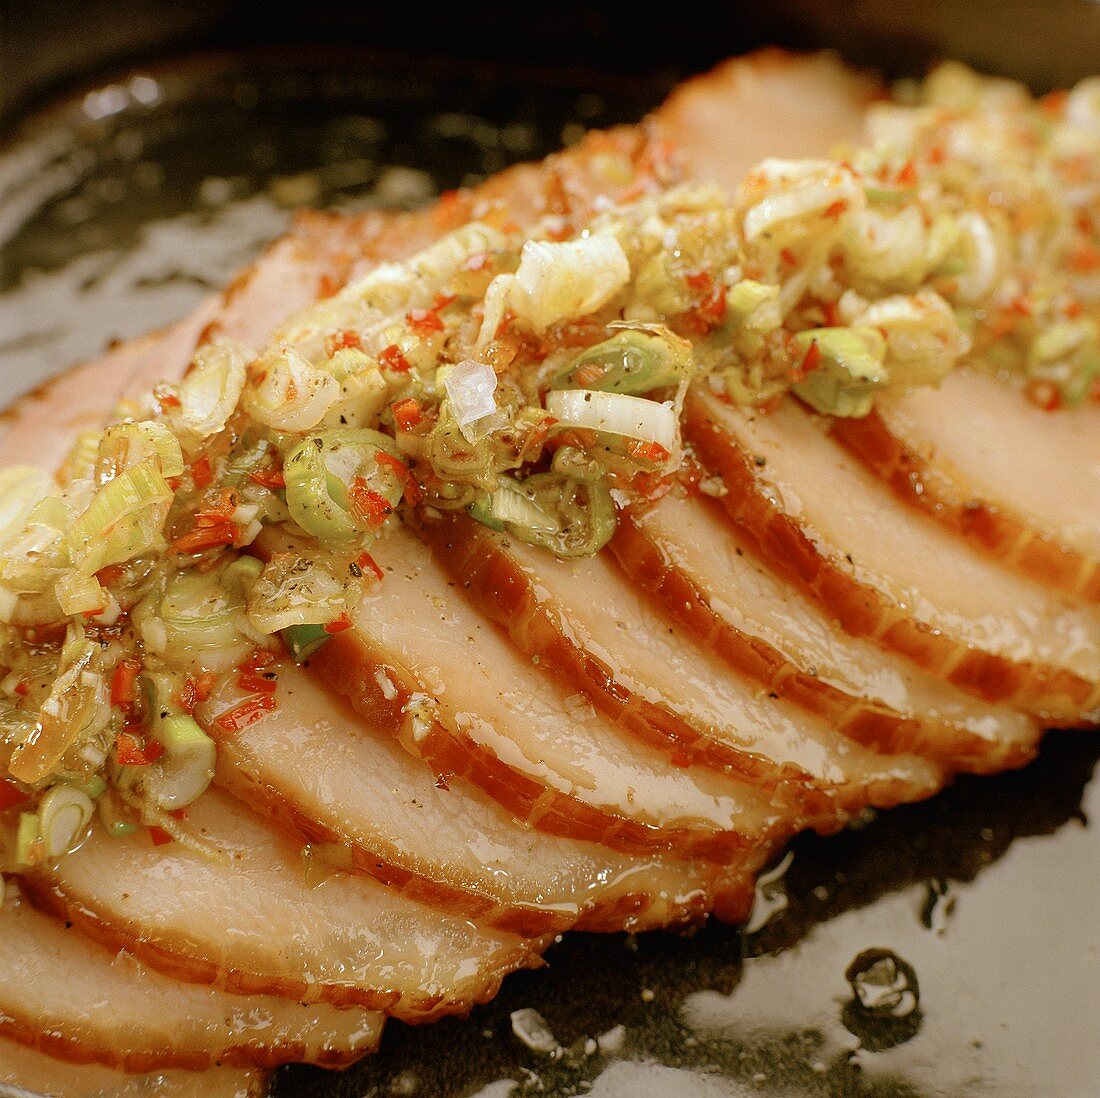 Sliced roast pork with spring onions and chili